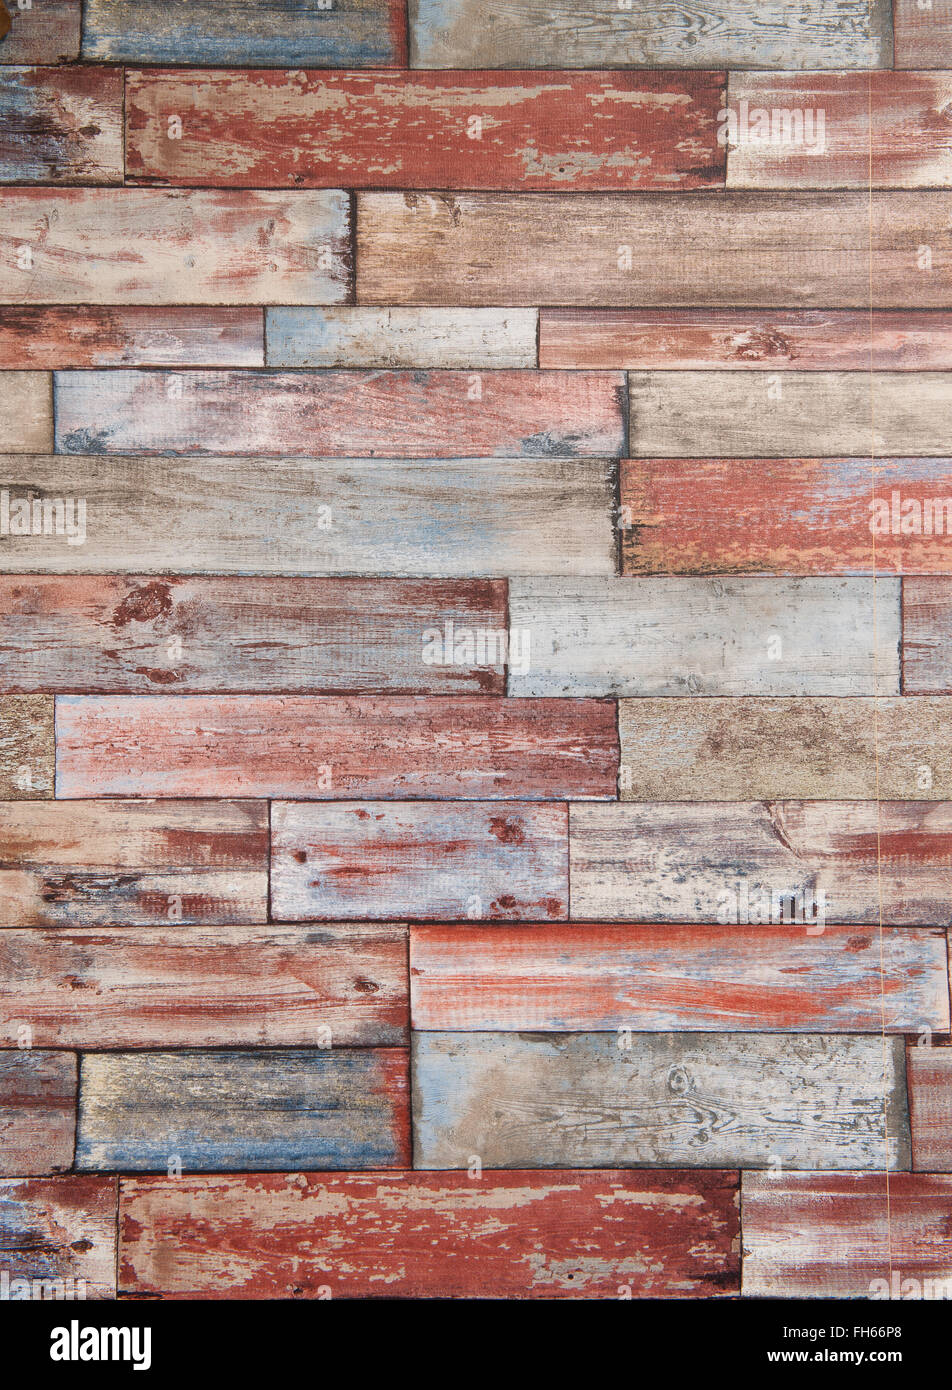 Vertical frame of colorful brick wall background with red blue and wooden look Stock Photo